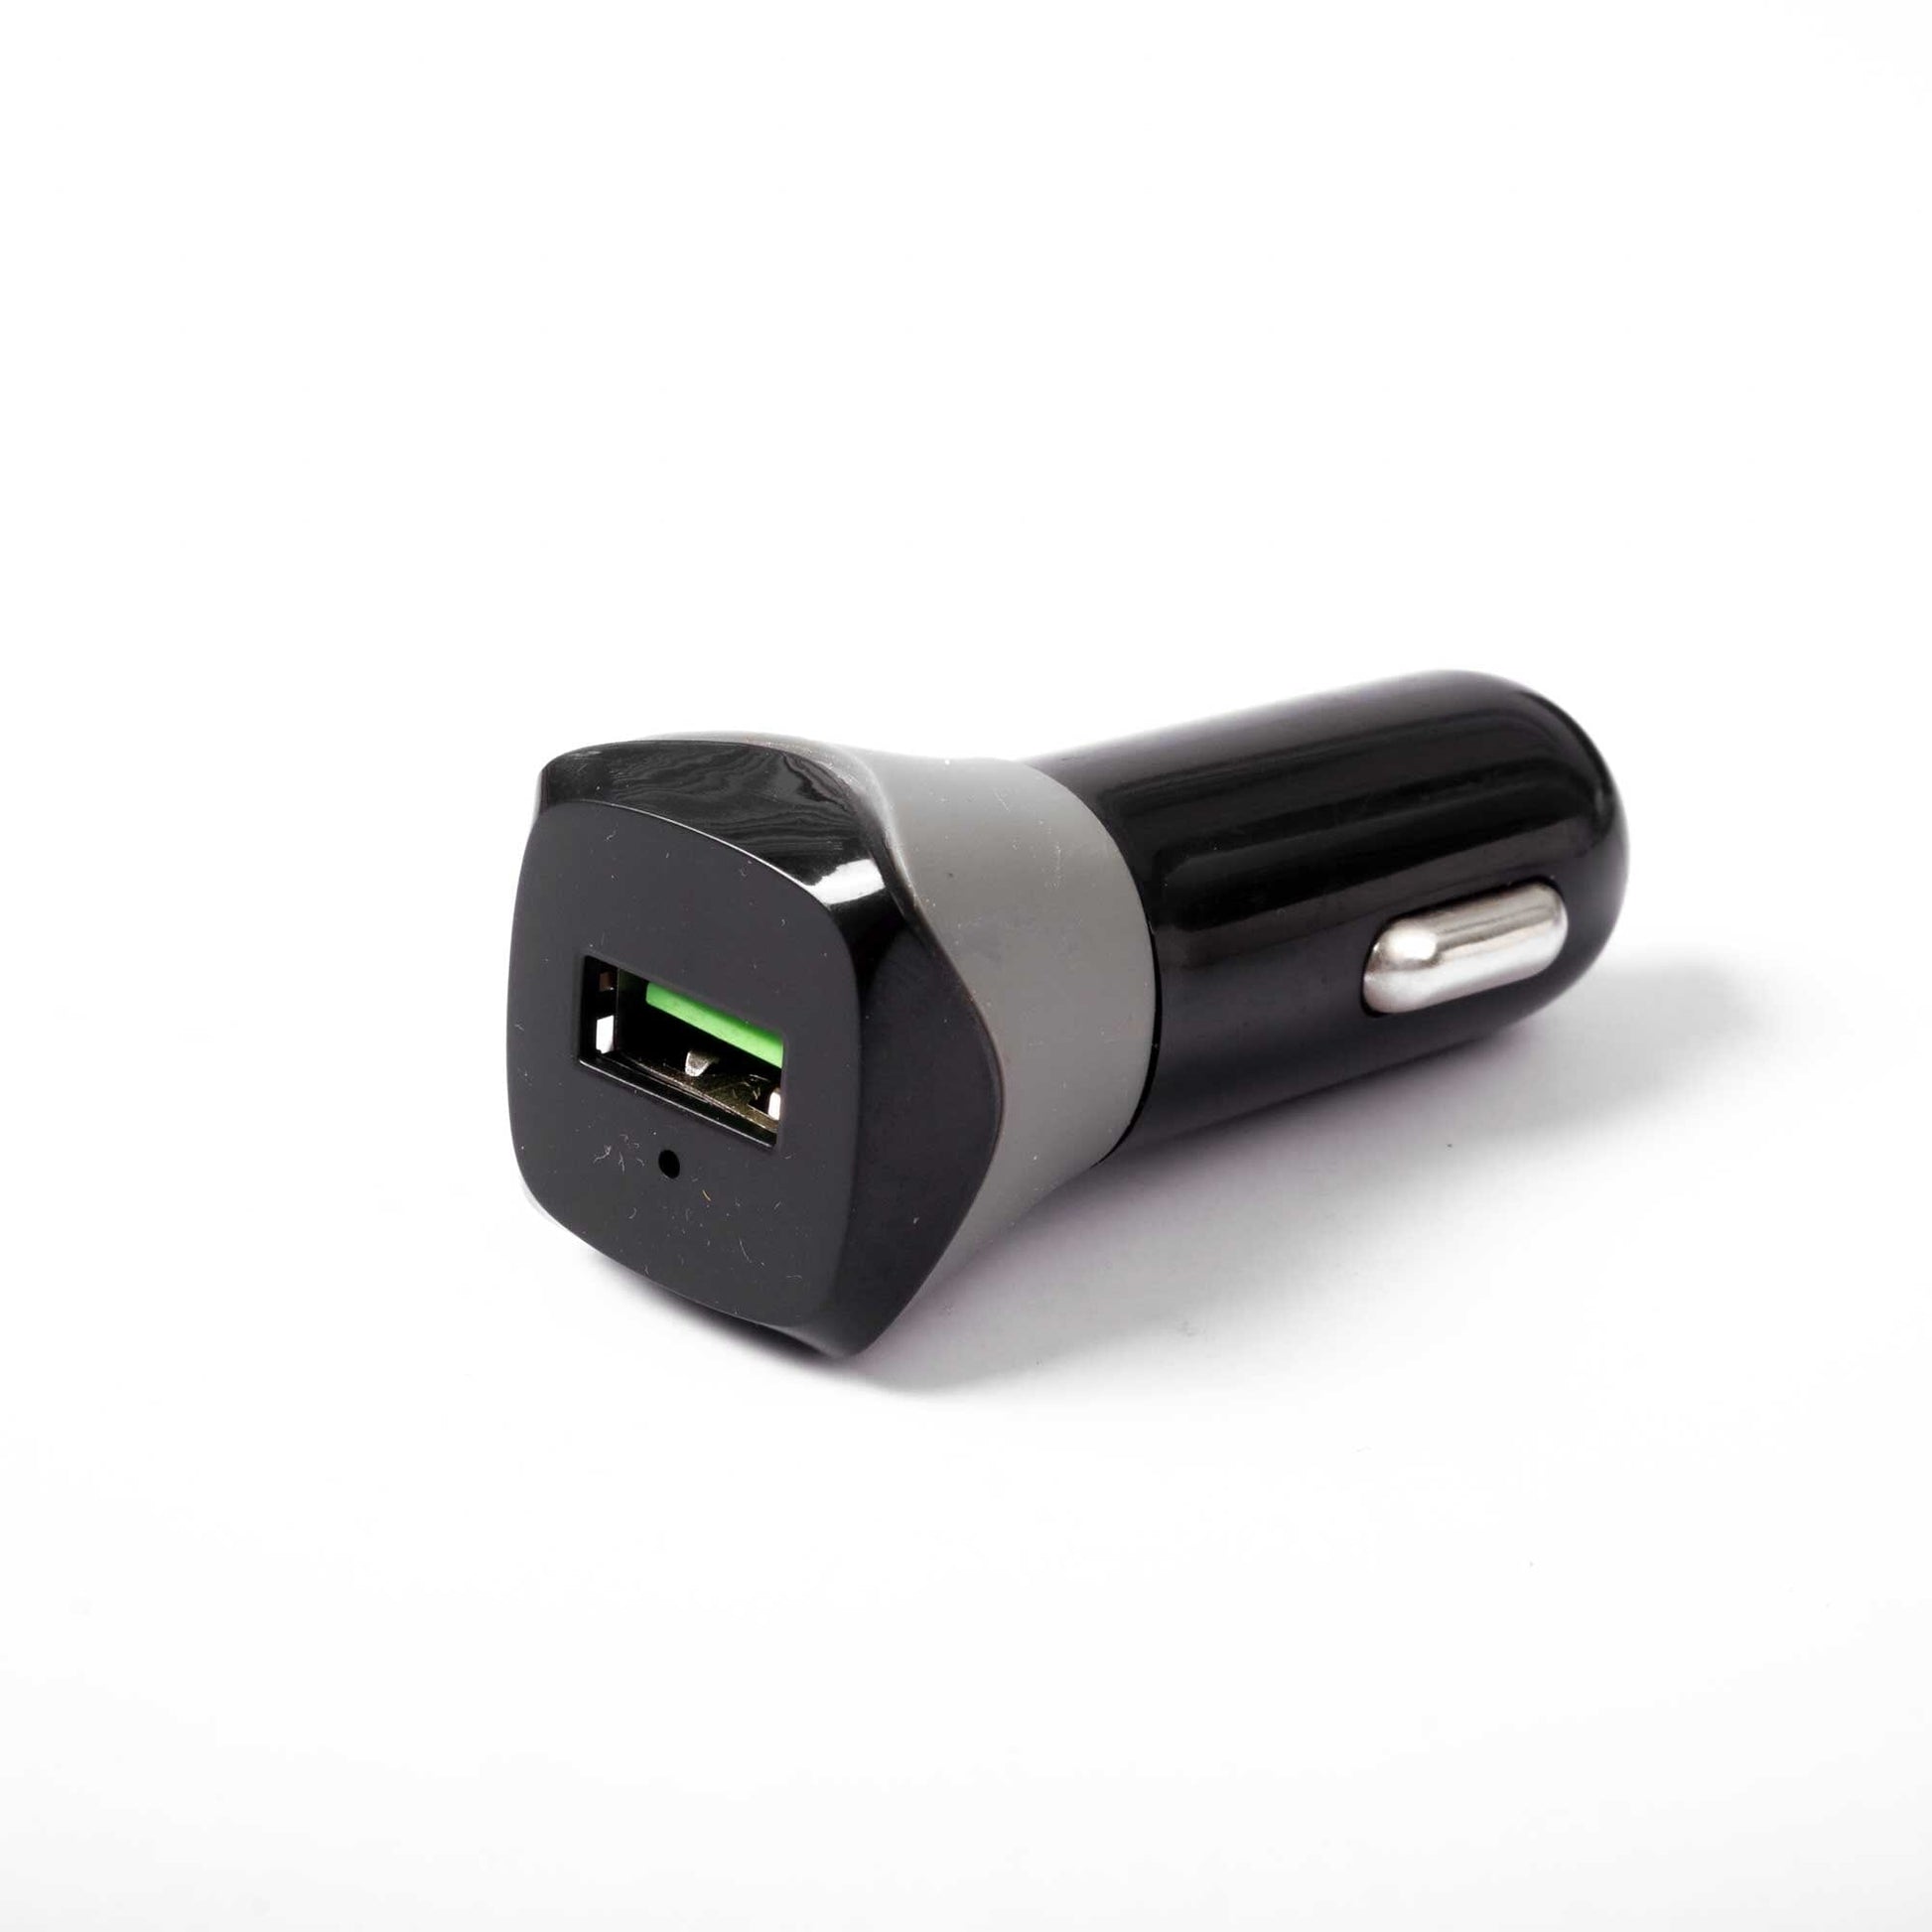 Qualcomm Quick Charge 2.0 USB Car Charger Mobile Accessories SDQ D2 